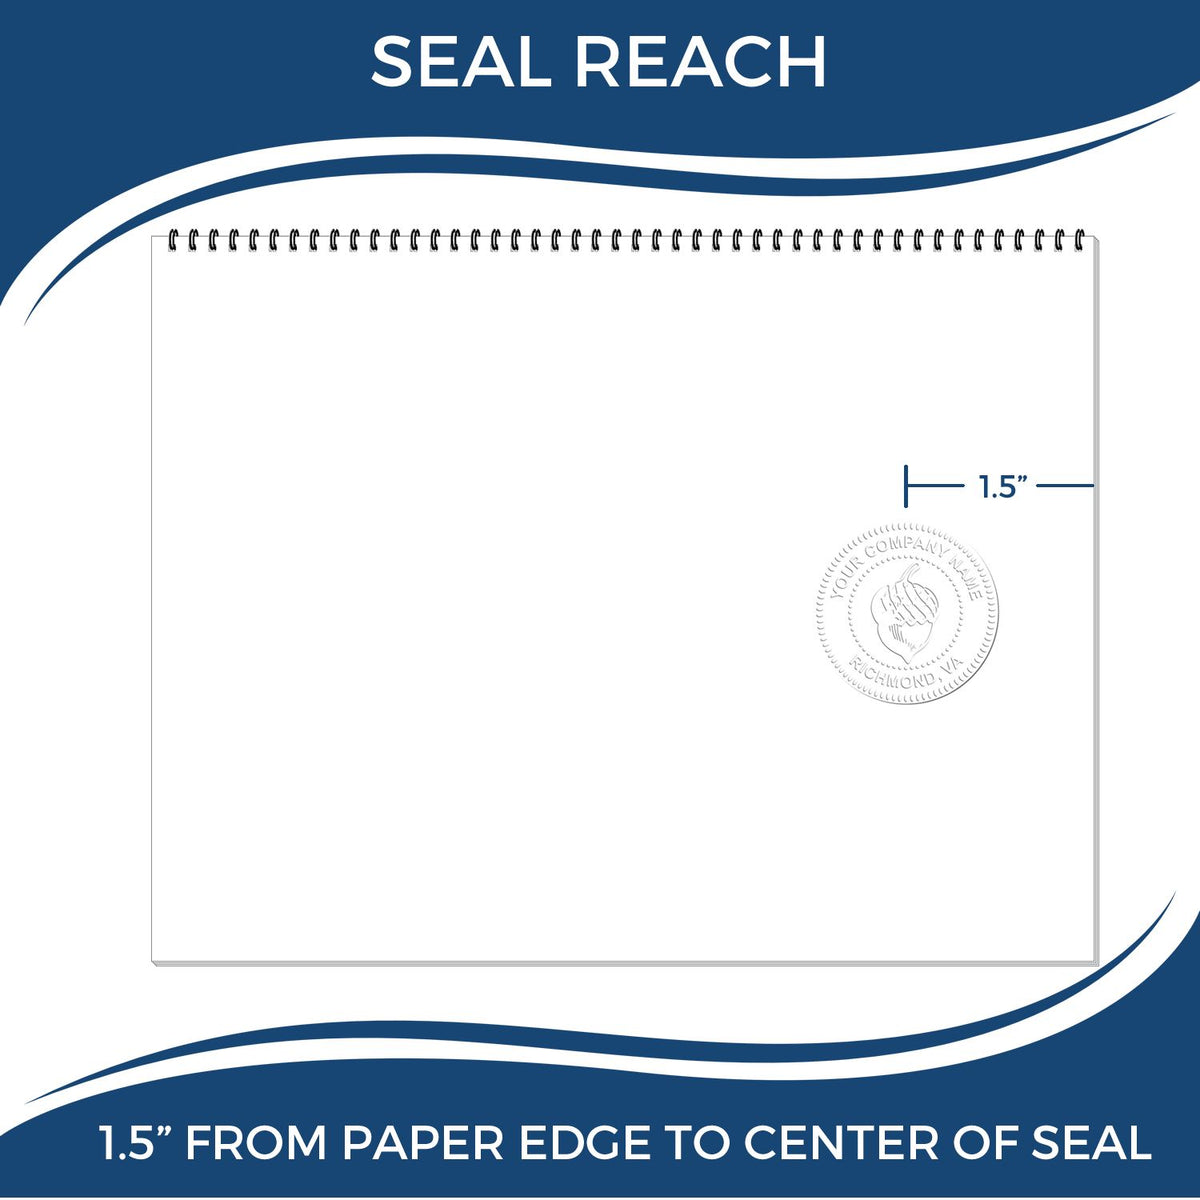 An infographic showing the seal reach which is represented by a ruler and a miniature seal image of the Handheld Georgia Professional Engineer Embosser